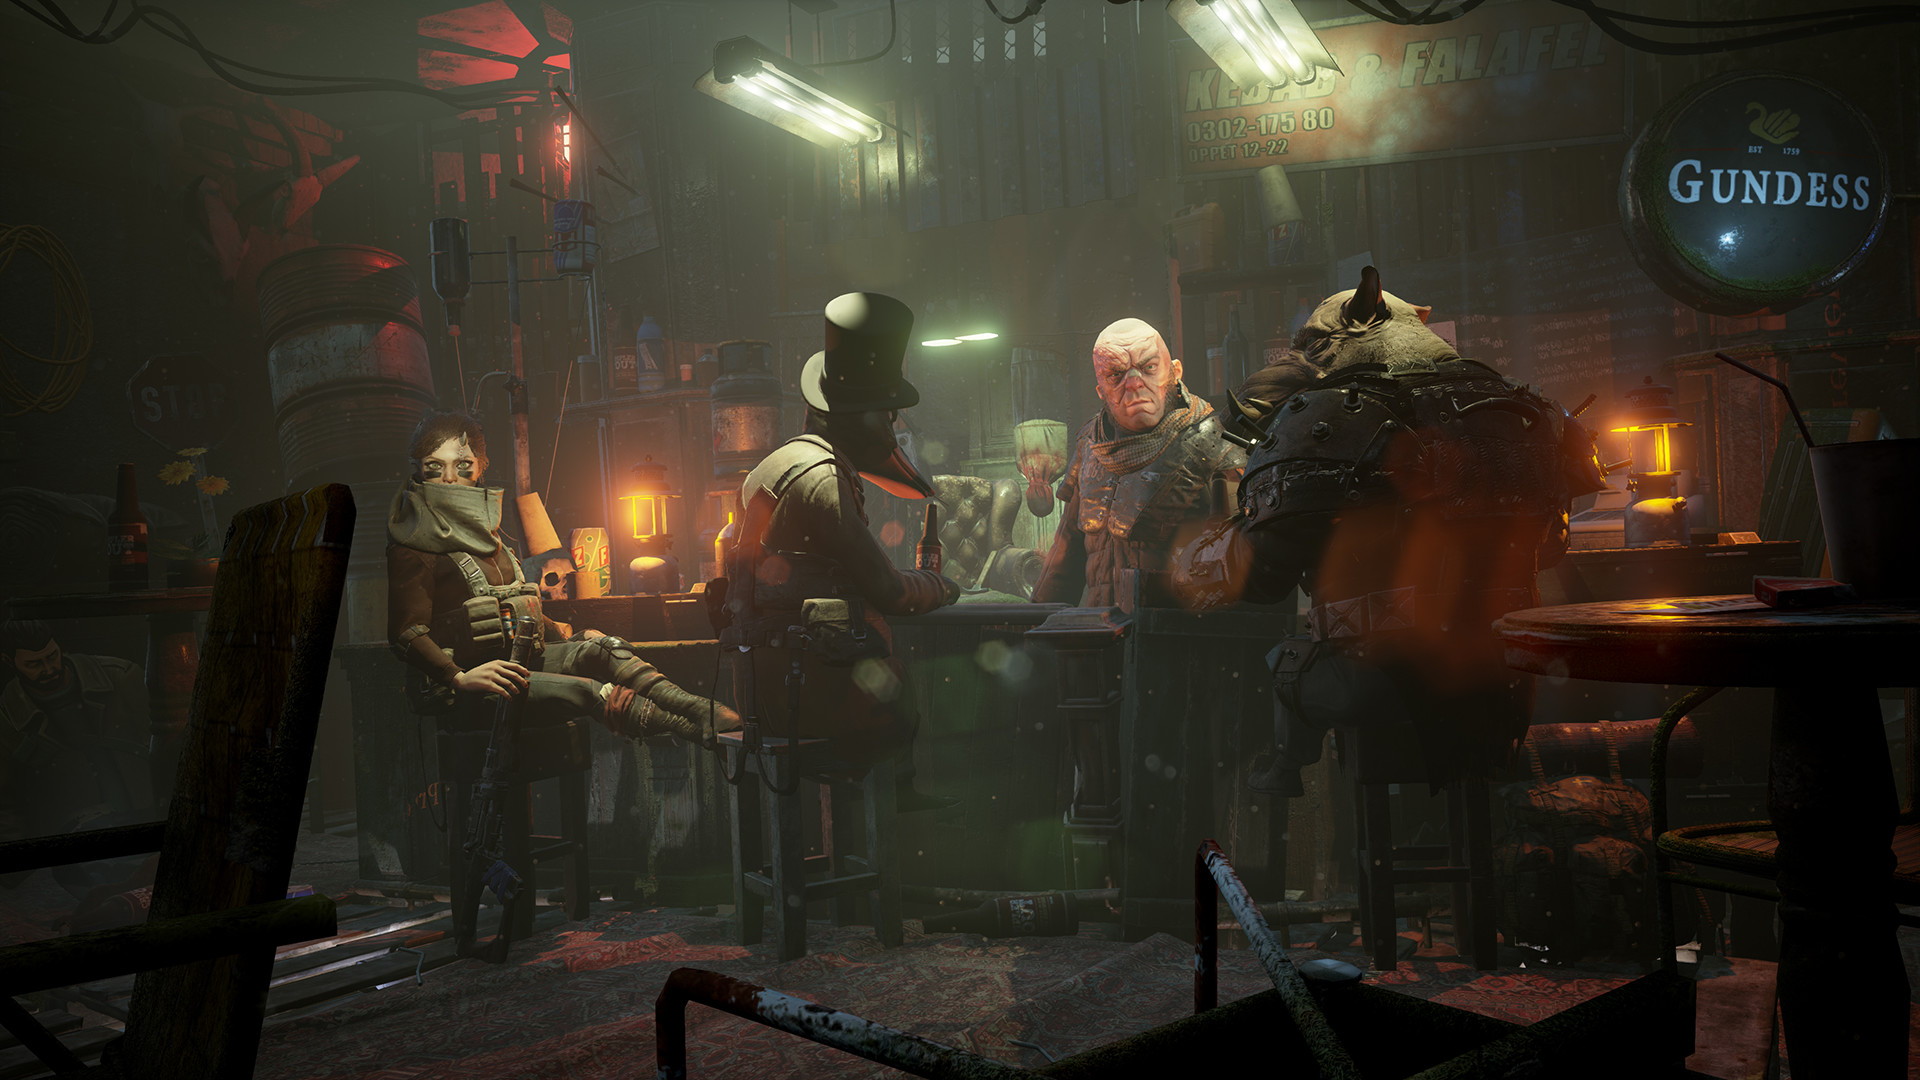 free download mutant year zero road to eden review